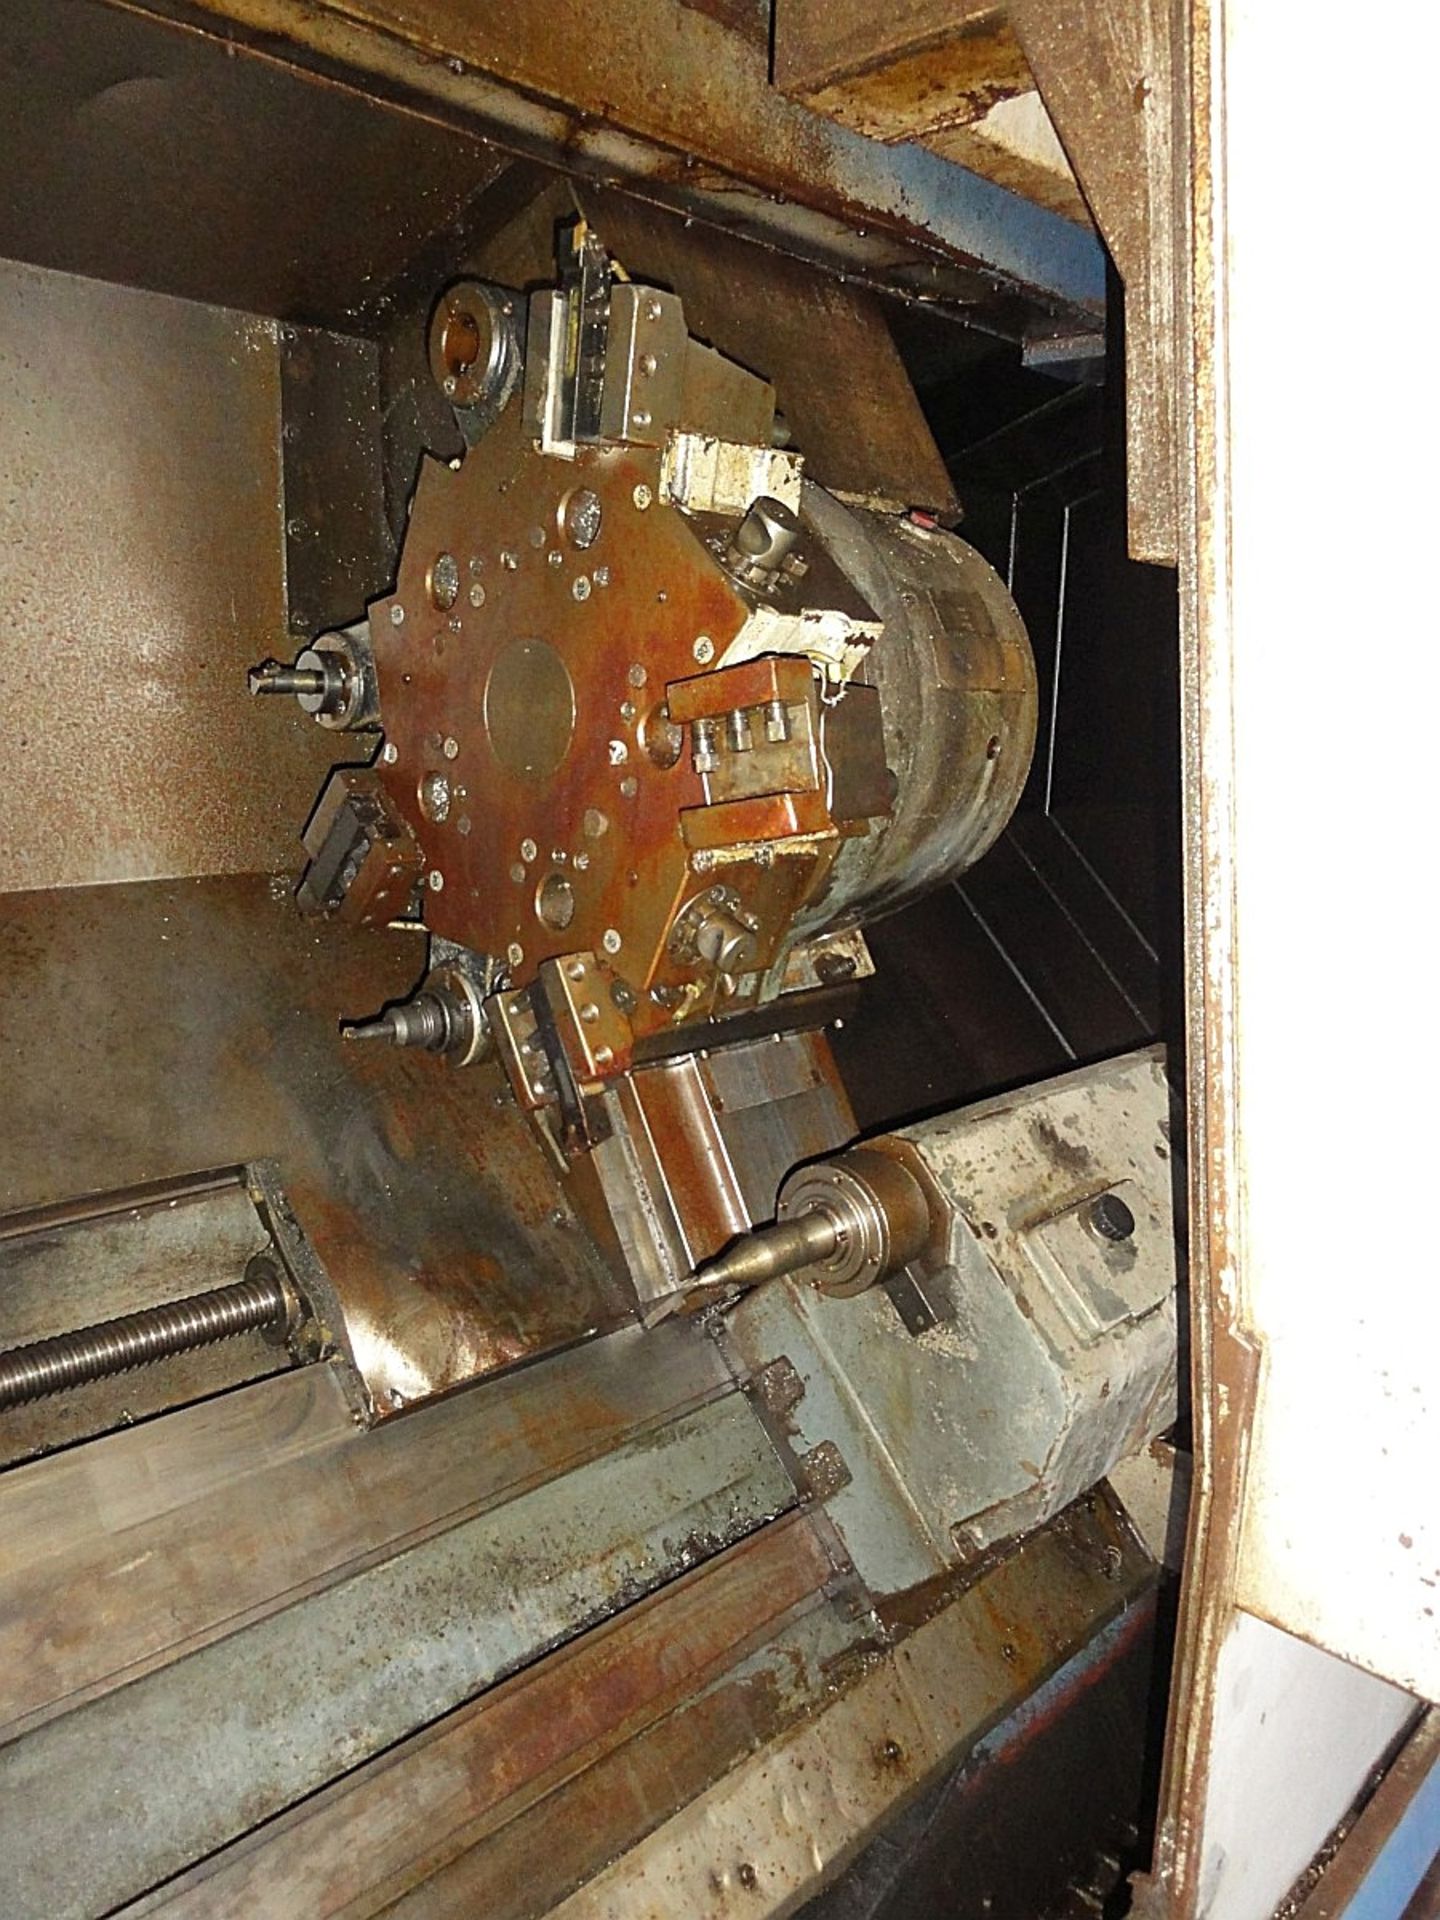 Mazak CNC Lathe, Mdl ST-40N 15" 3-jaw chuck, w/ tooling, X= 19.5" , Z= 61", 21" Swing Over Bed, 13. - Image 3 of 7